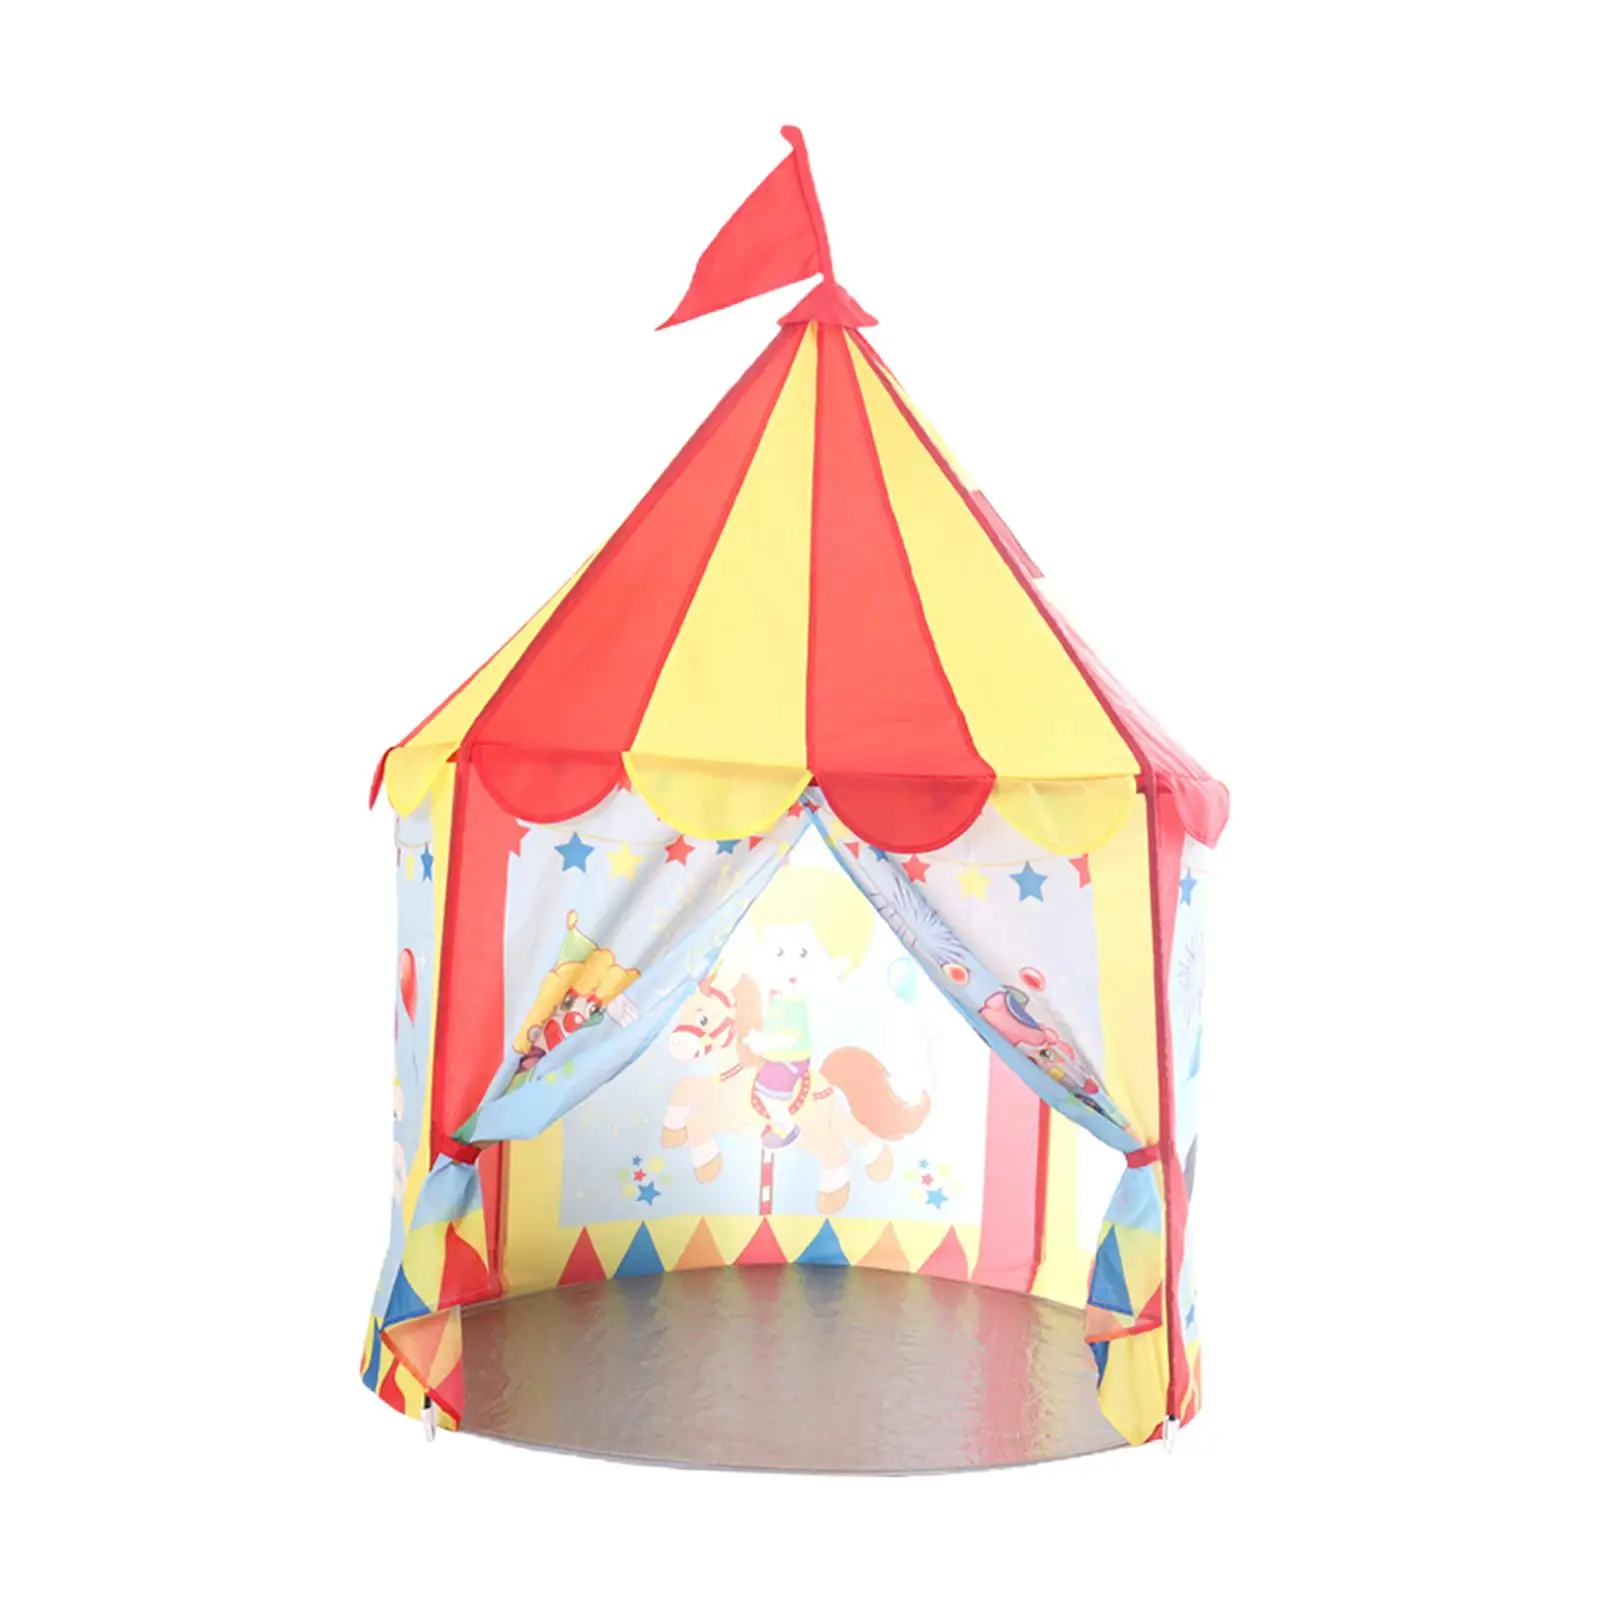 Children Castle Playhous Portable Best Gift for Kids Foldable Easy to Assemble Play Tent House for garden Home Yard Baby